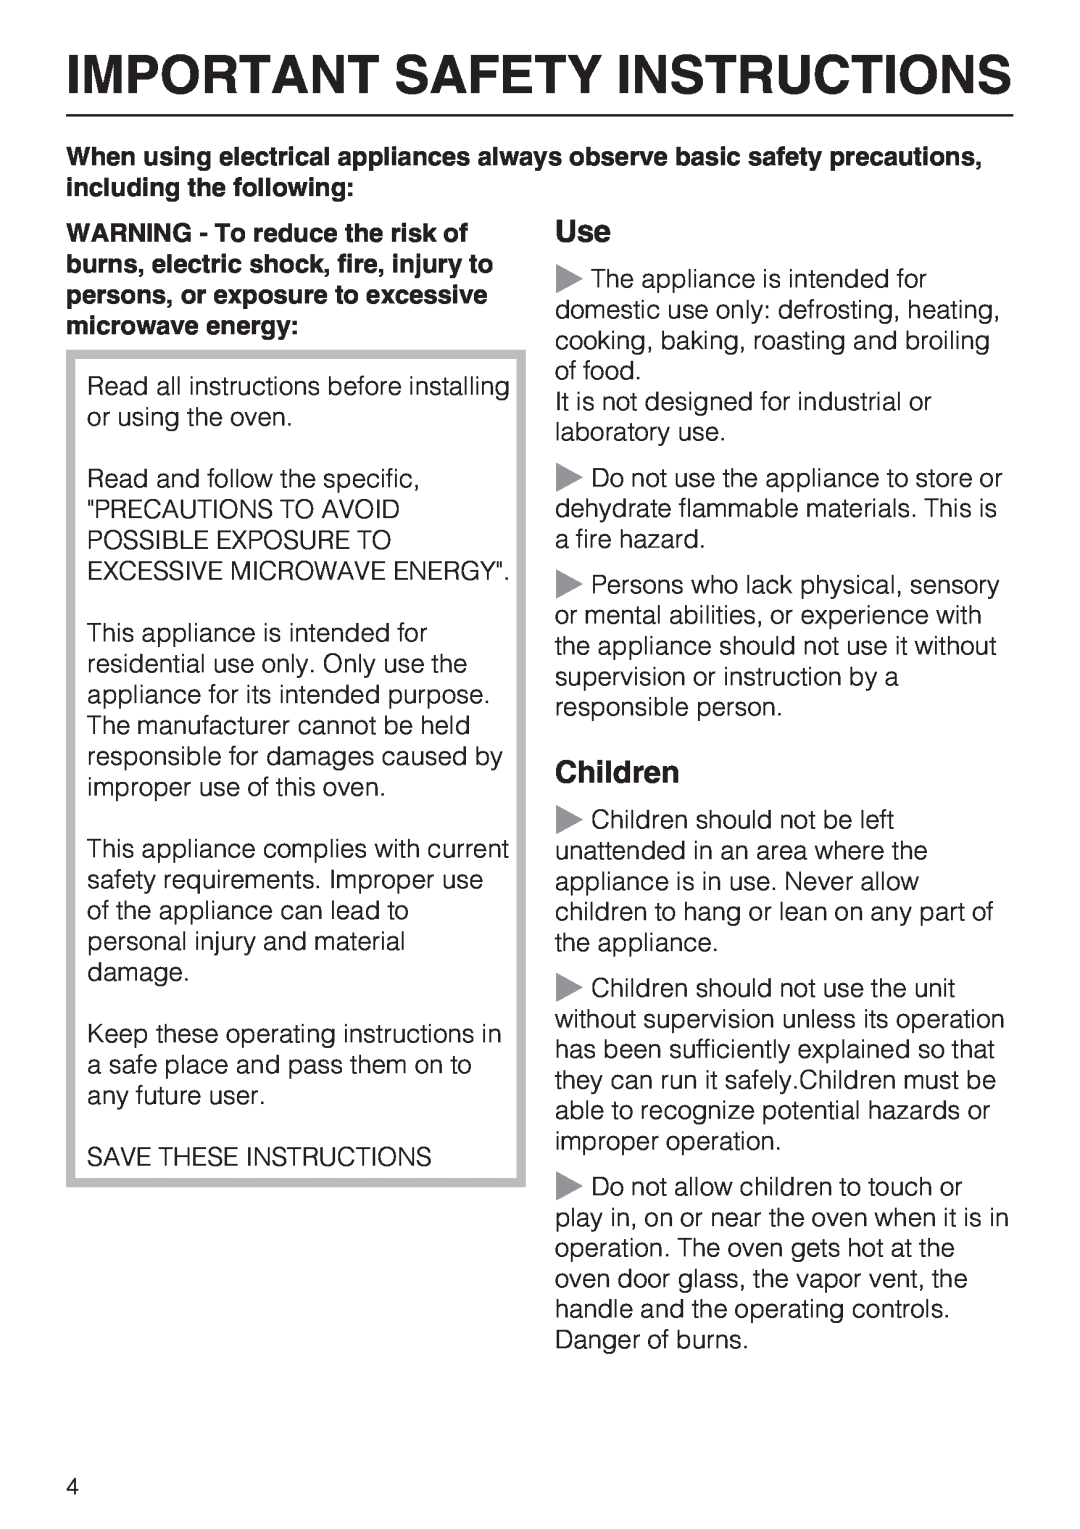 Miele H 4042 BM installation instructions Important Safety Instructions, Children 